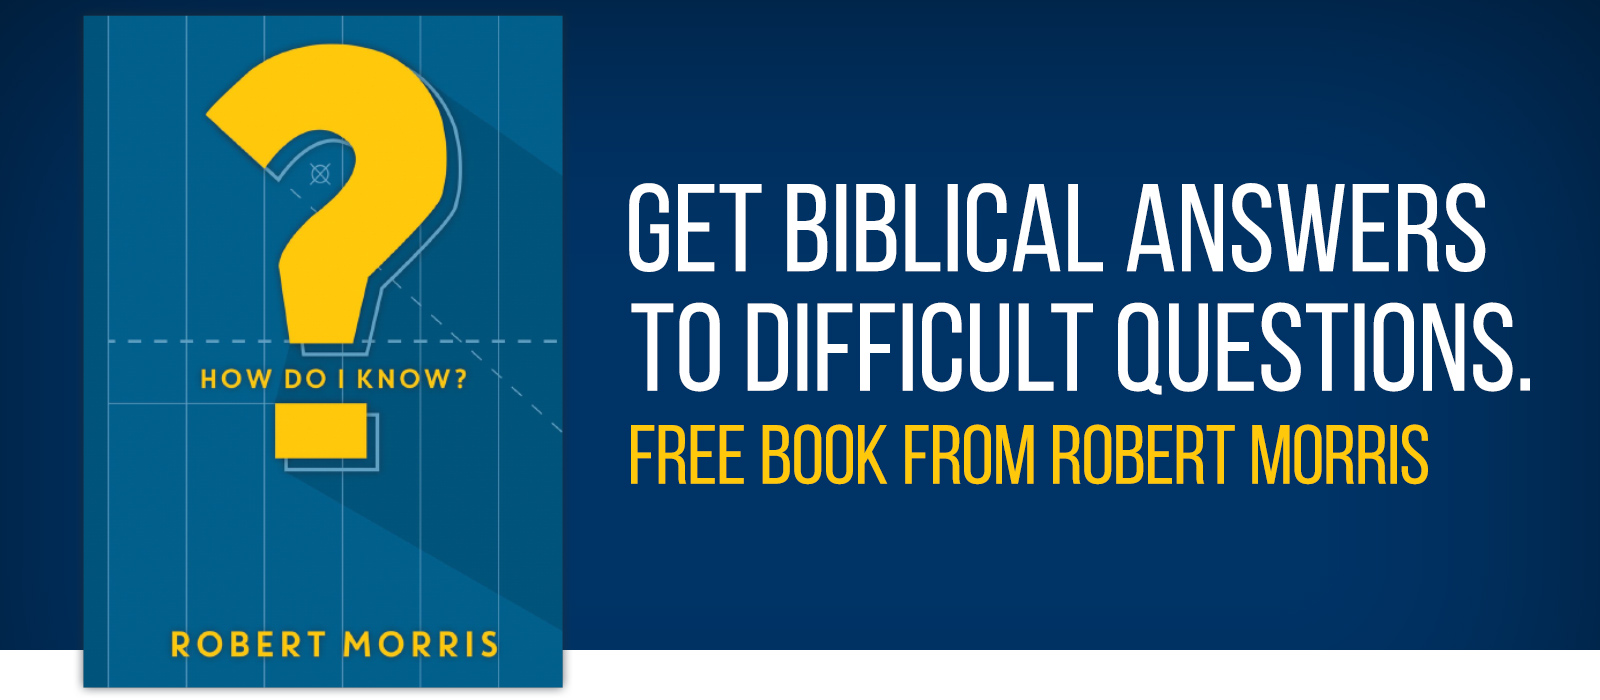 Get Biblical Answers to Difficult Questions. FREE Book from Robert Morris